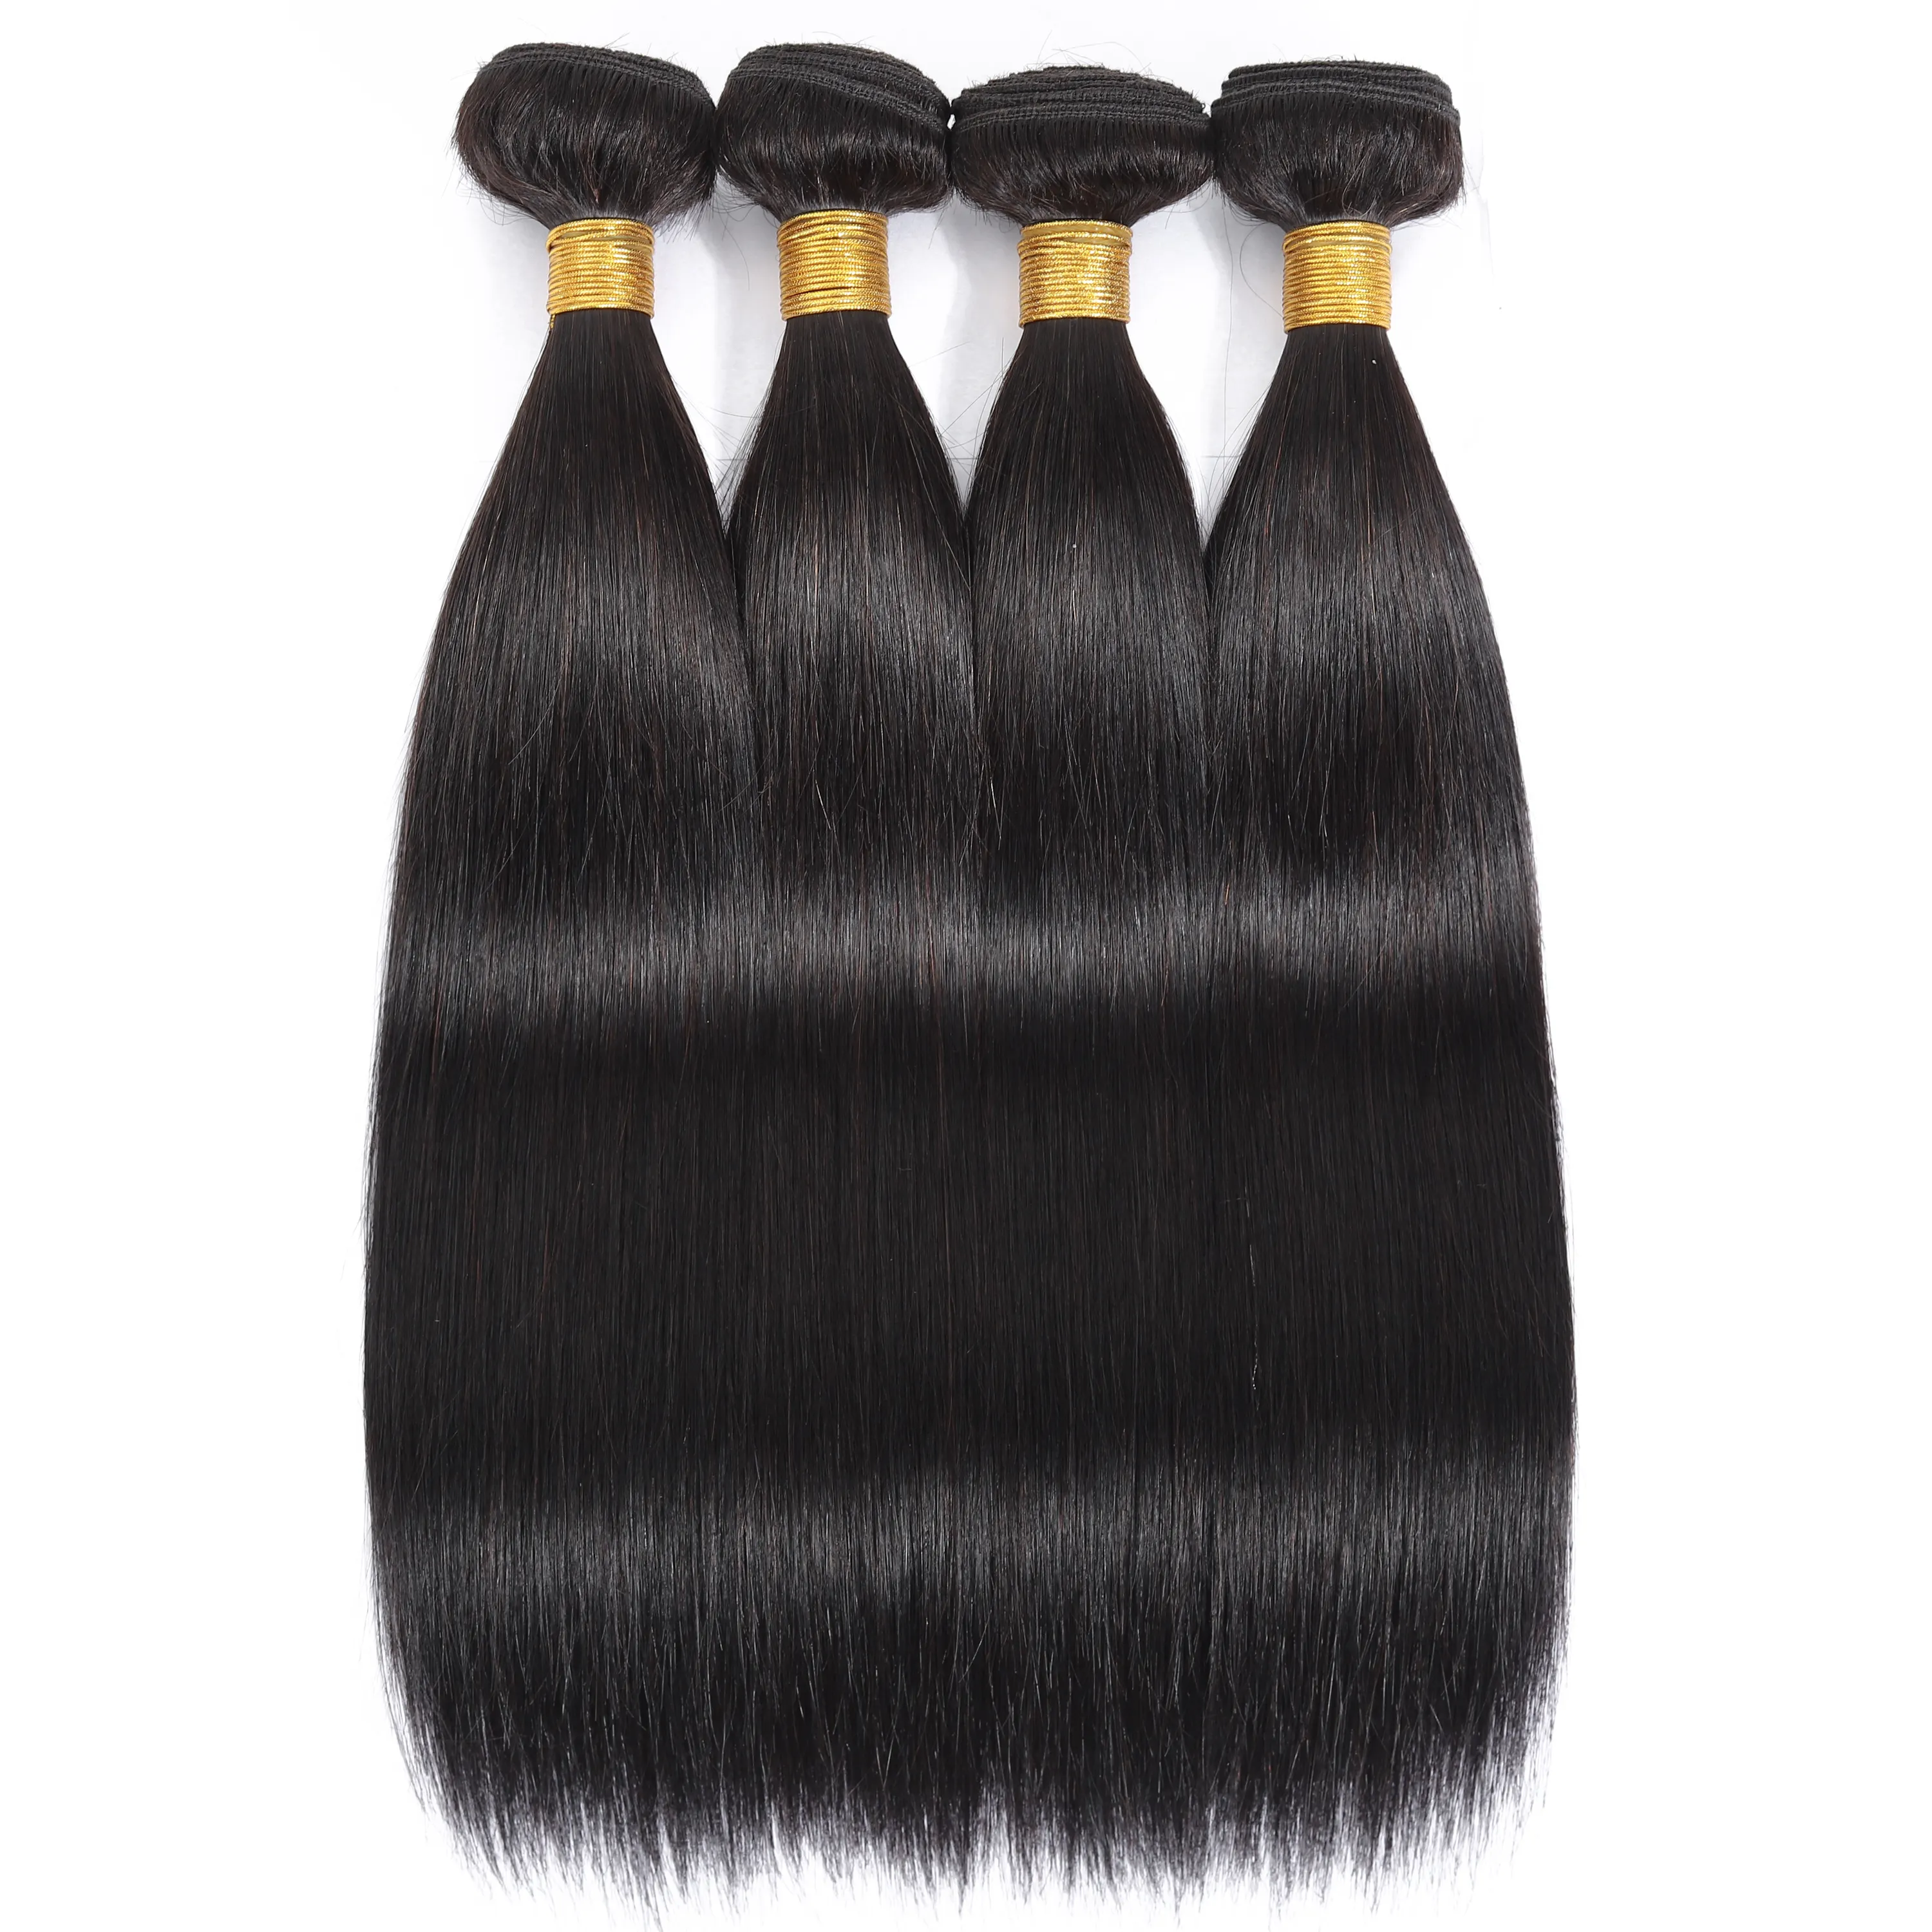 8-40 Inch Straight Mink Brazilian Human Hair Weave Bundles Vendors Raw Cuticle Aligned Black Hair Products Human Hair Extension